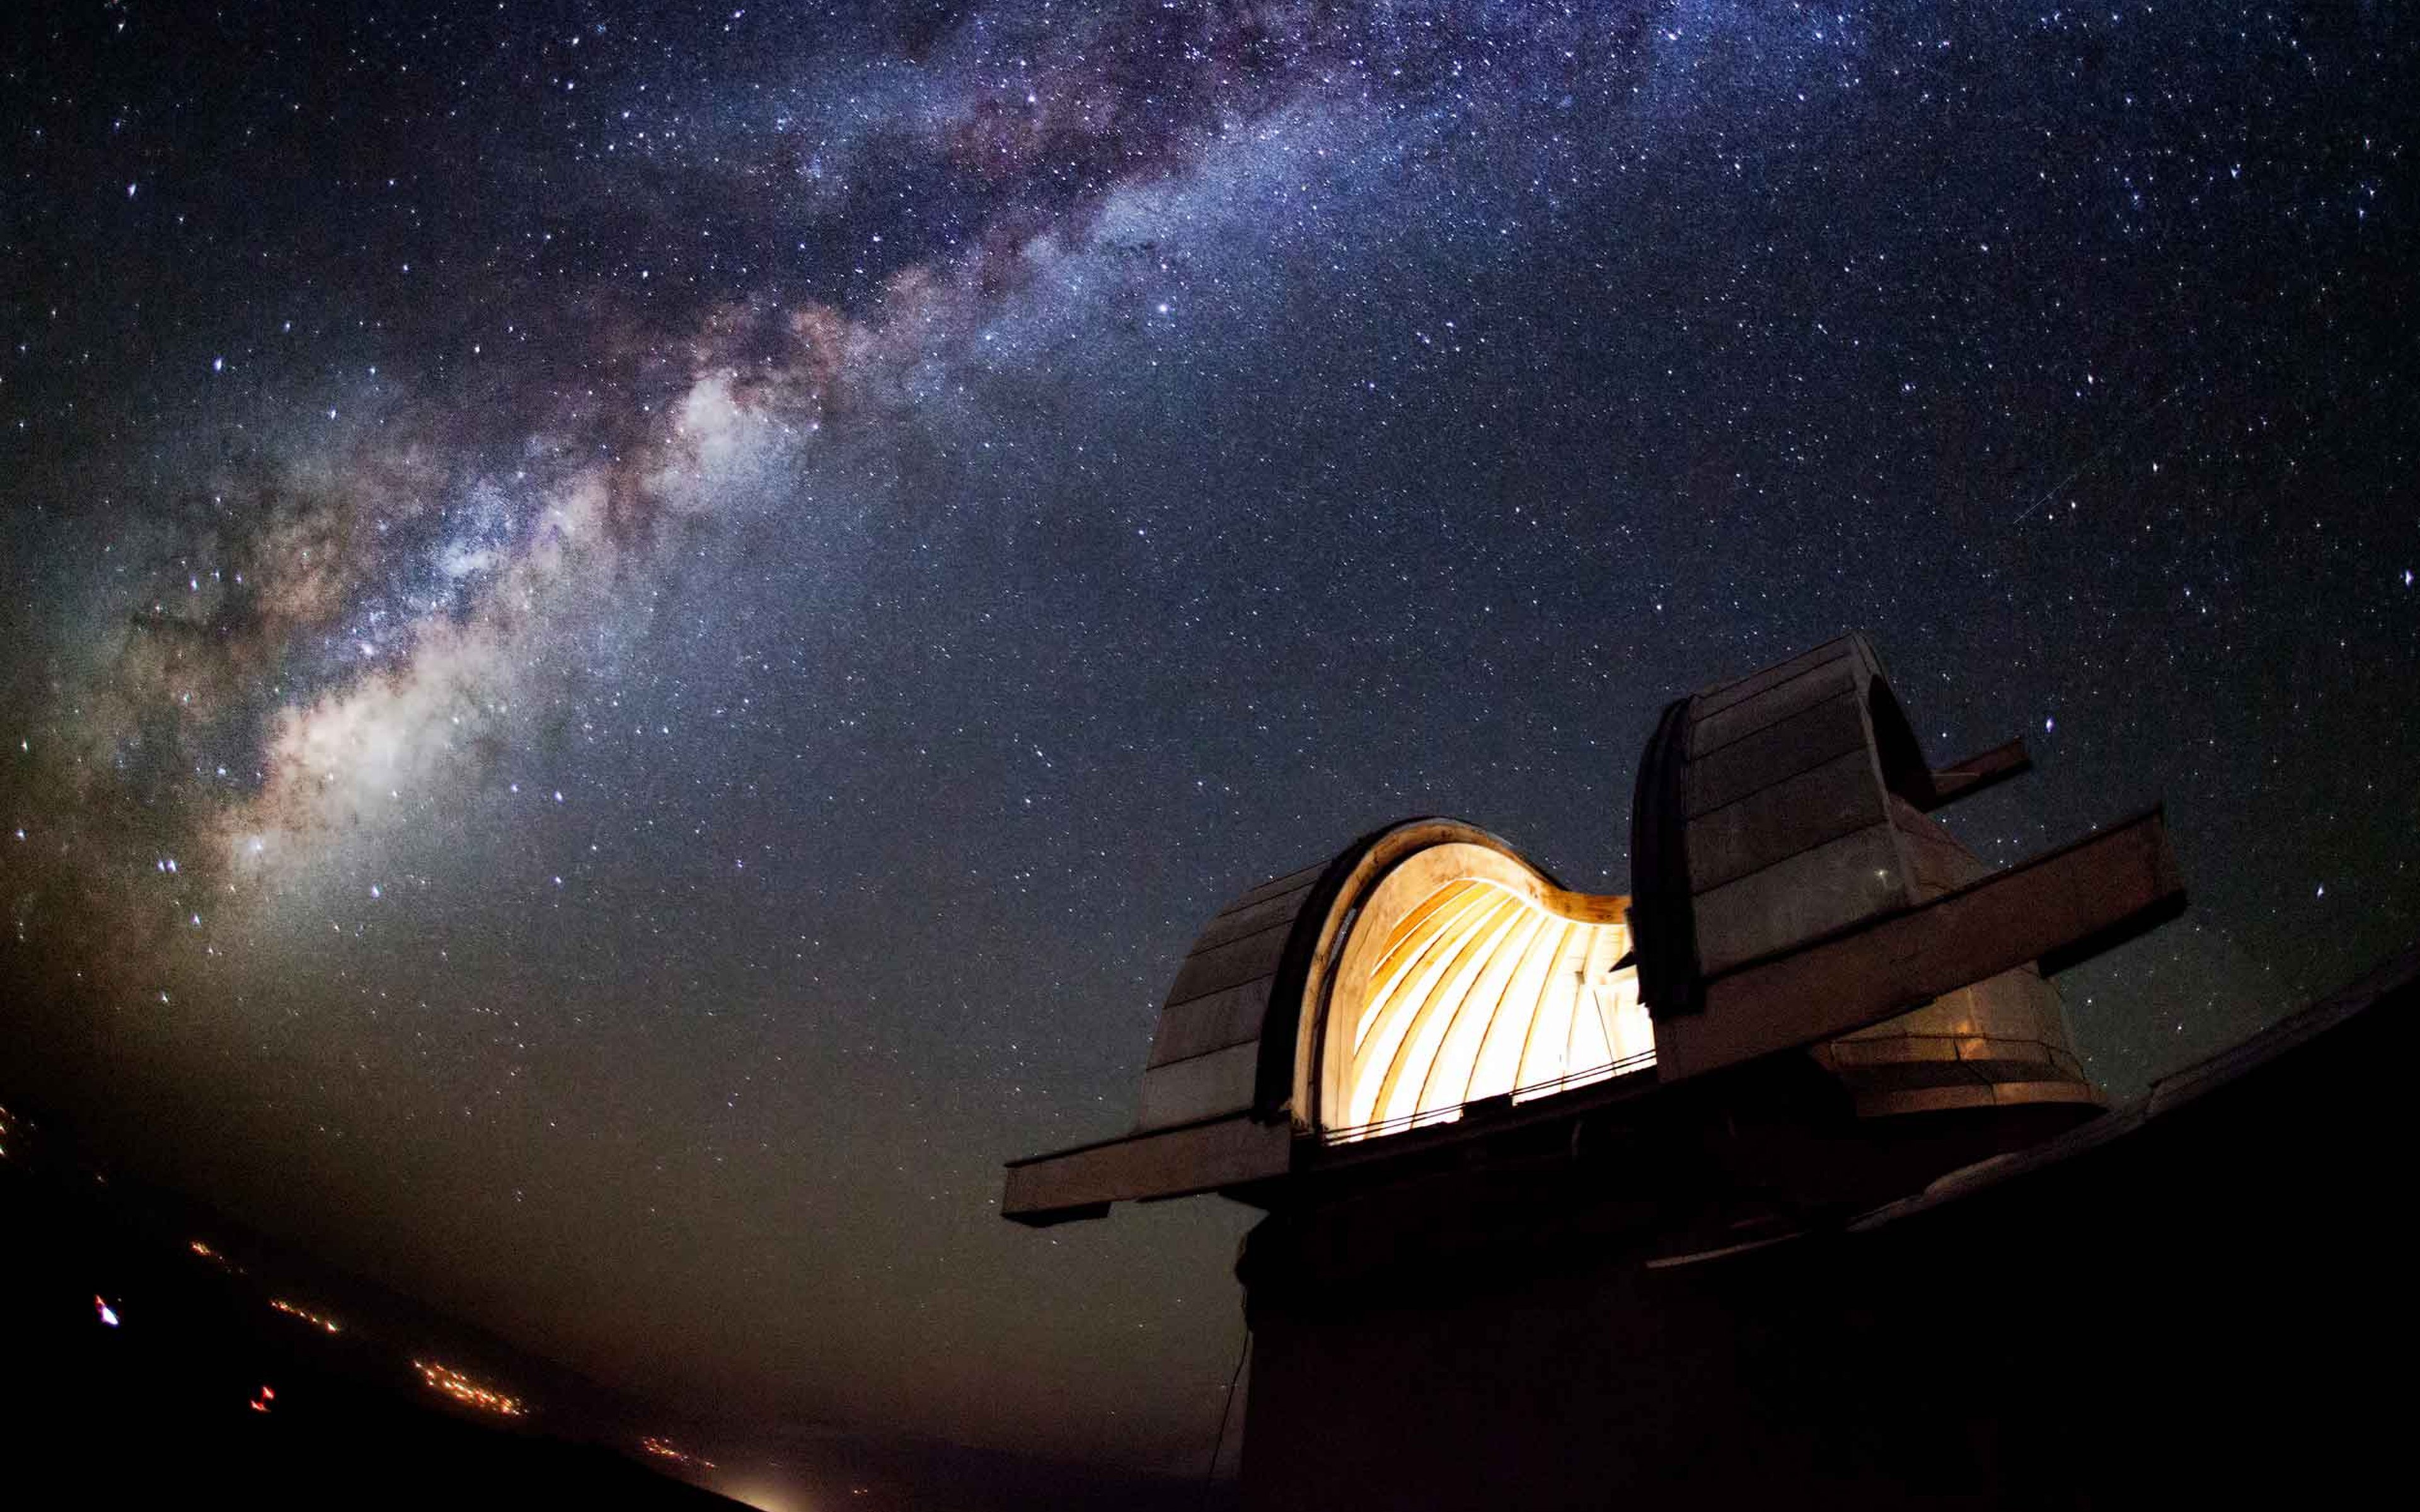 Astronomical Observatory under the starlit sky filled with the milky way.